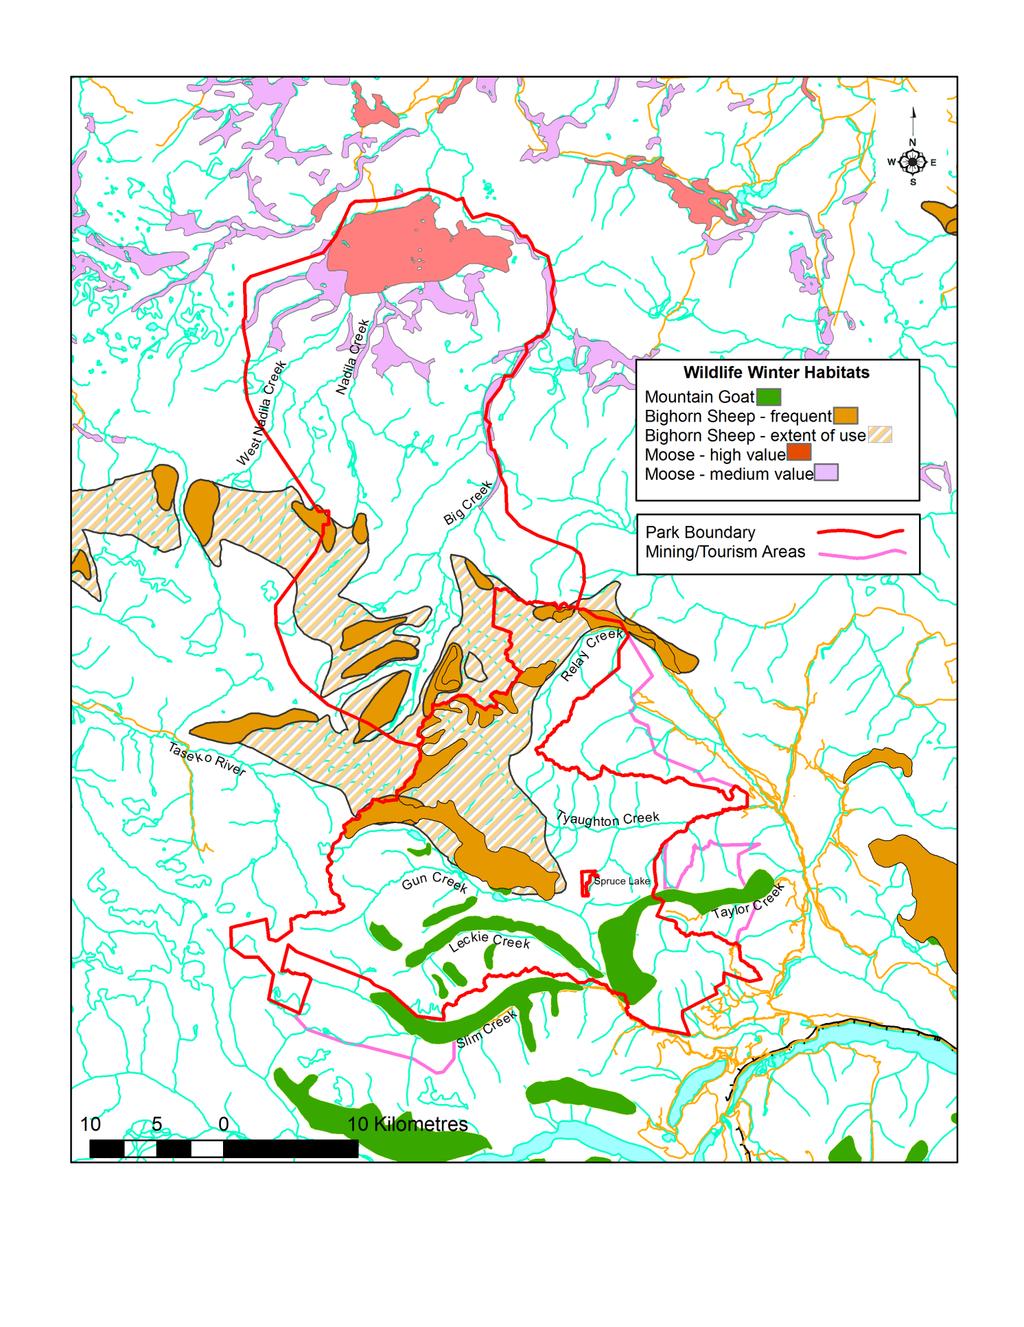 Figure 4: Winter Range Areas for Mountain Goat, Bighorn Sheep and Moose